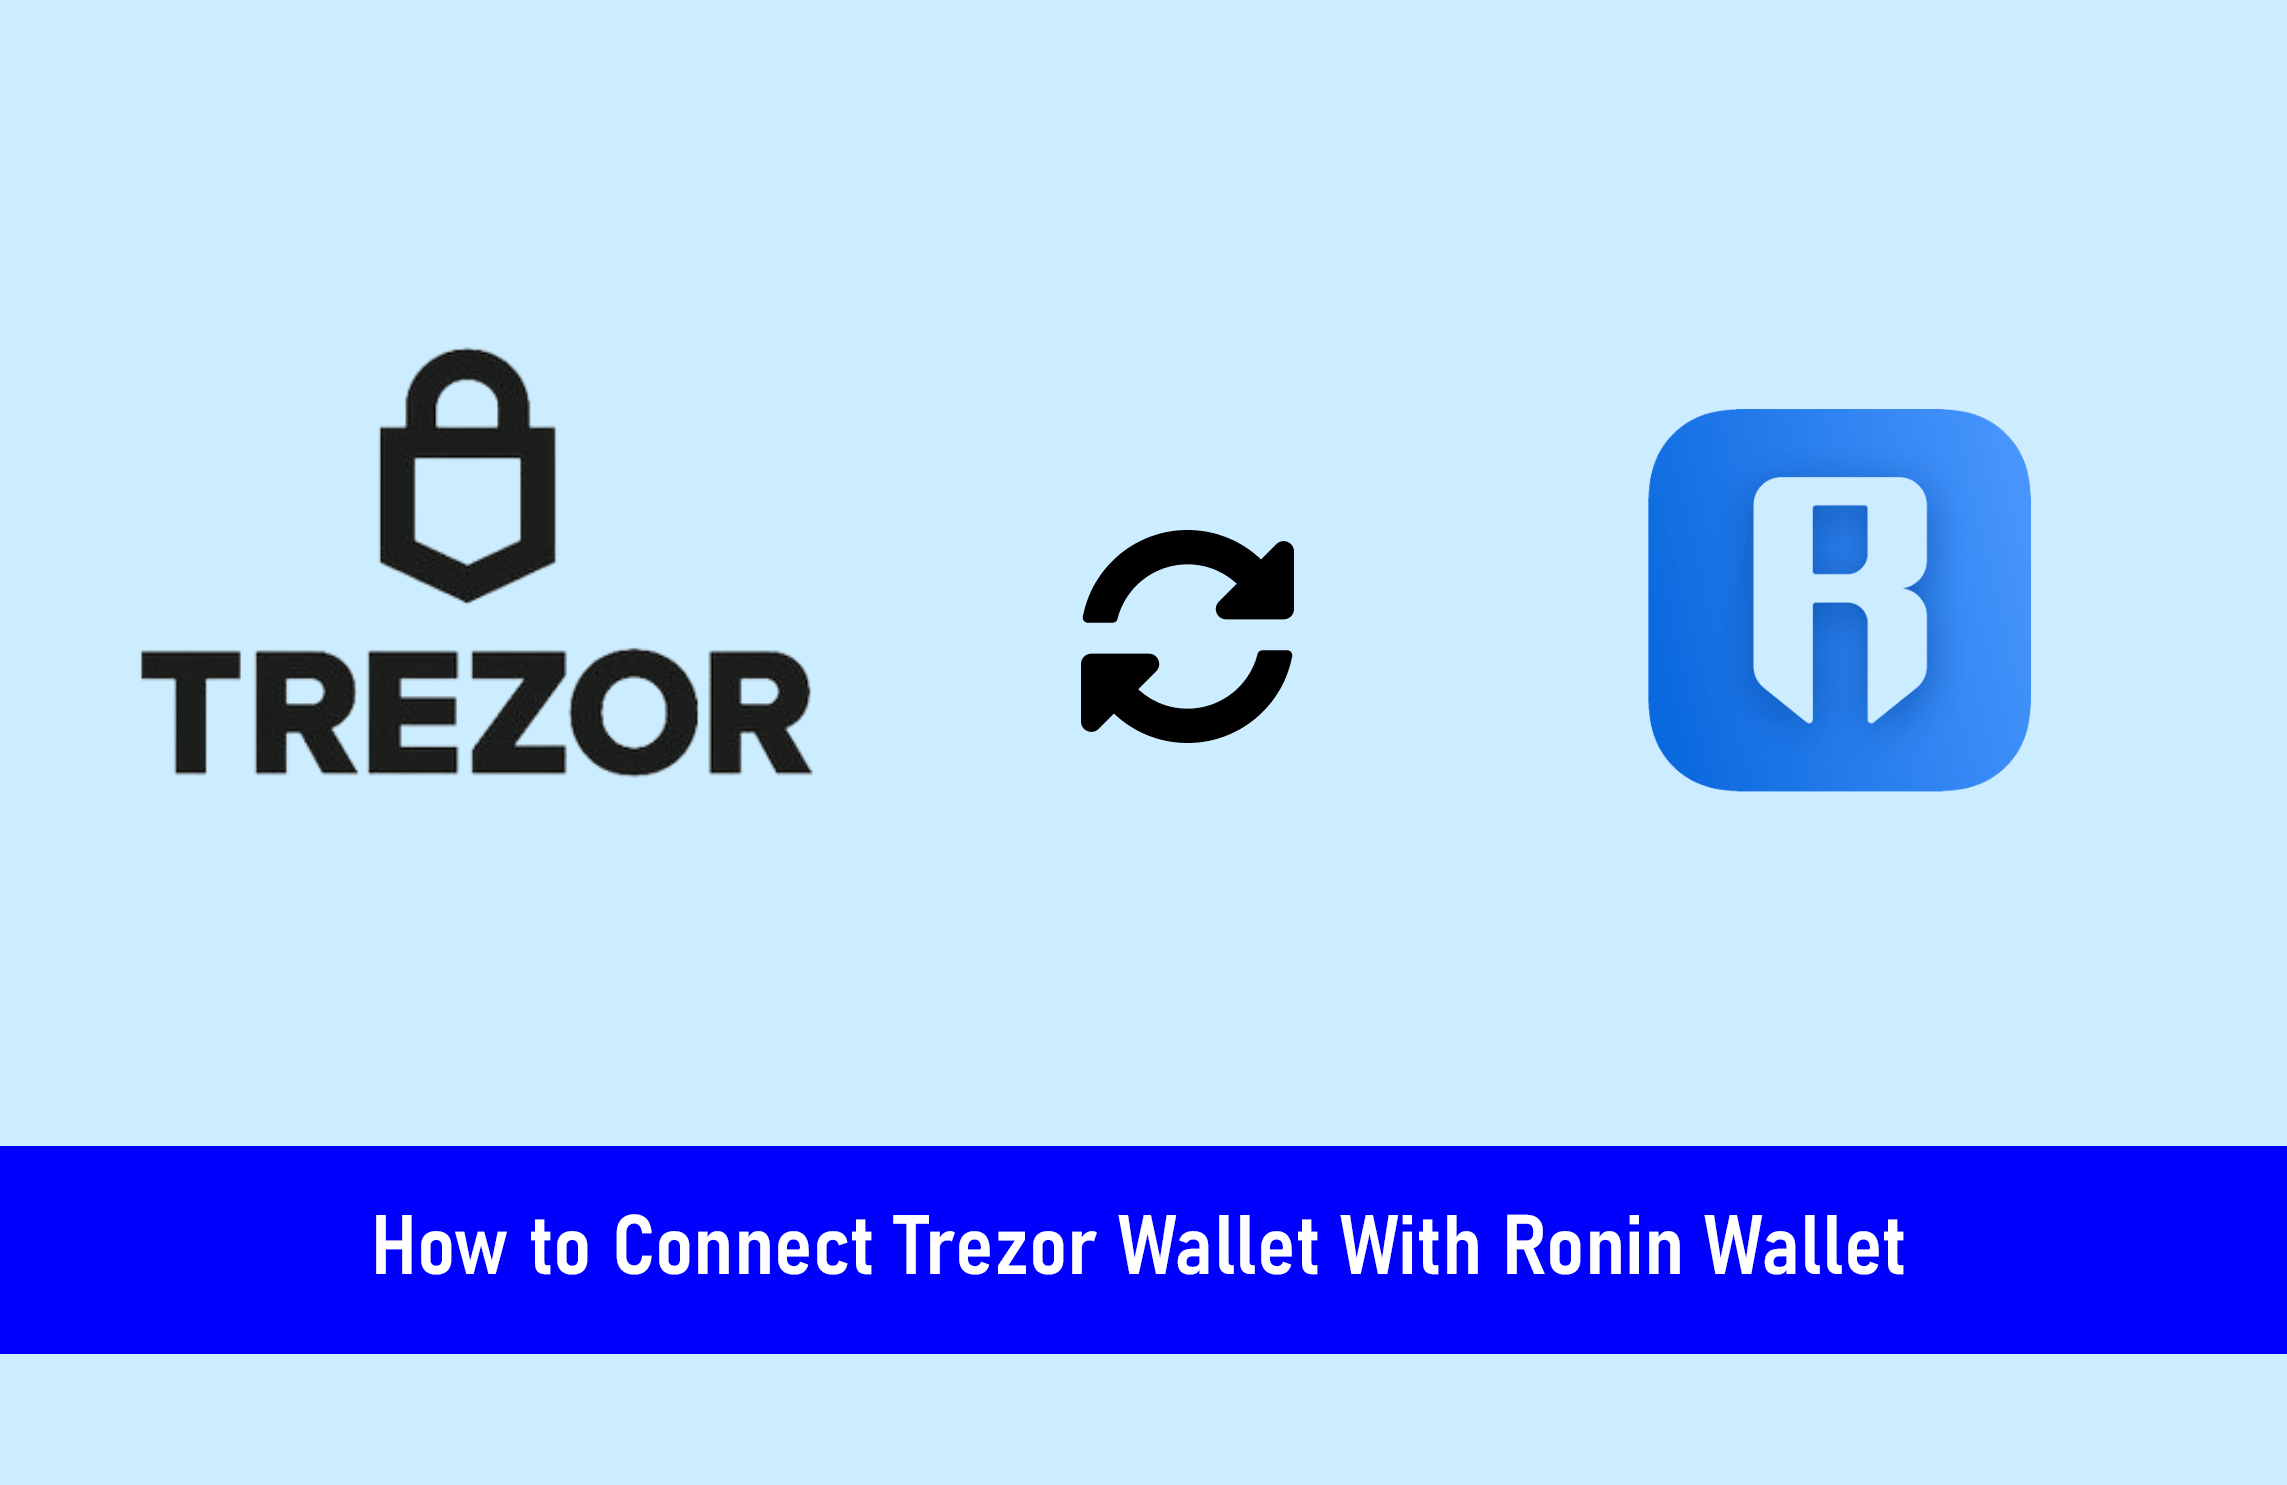 How To Connect Trezor Wallet With Ronin Wallet